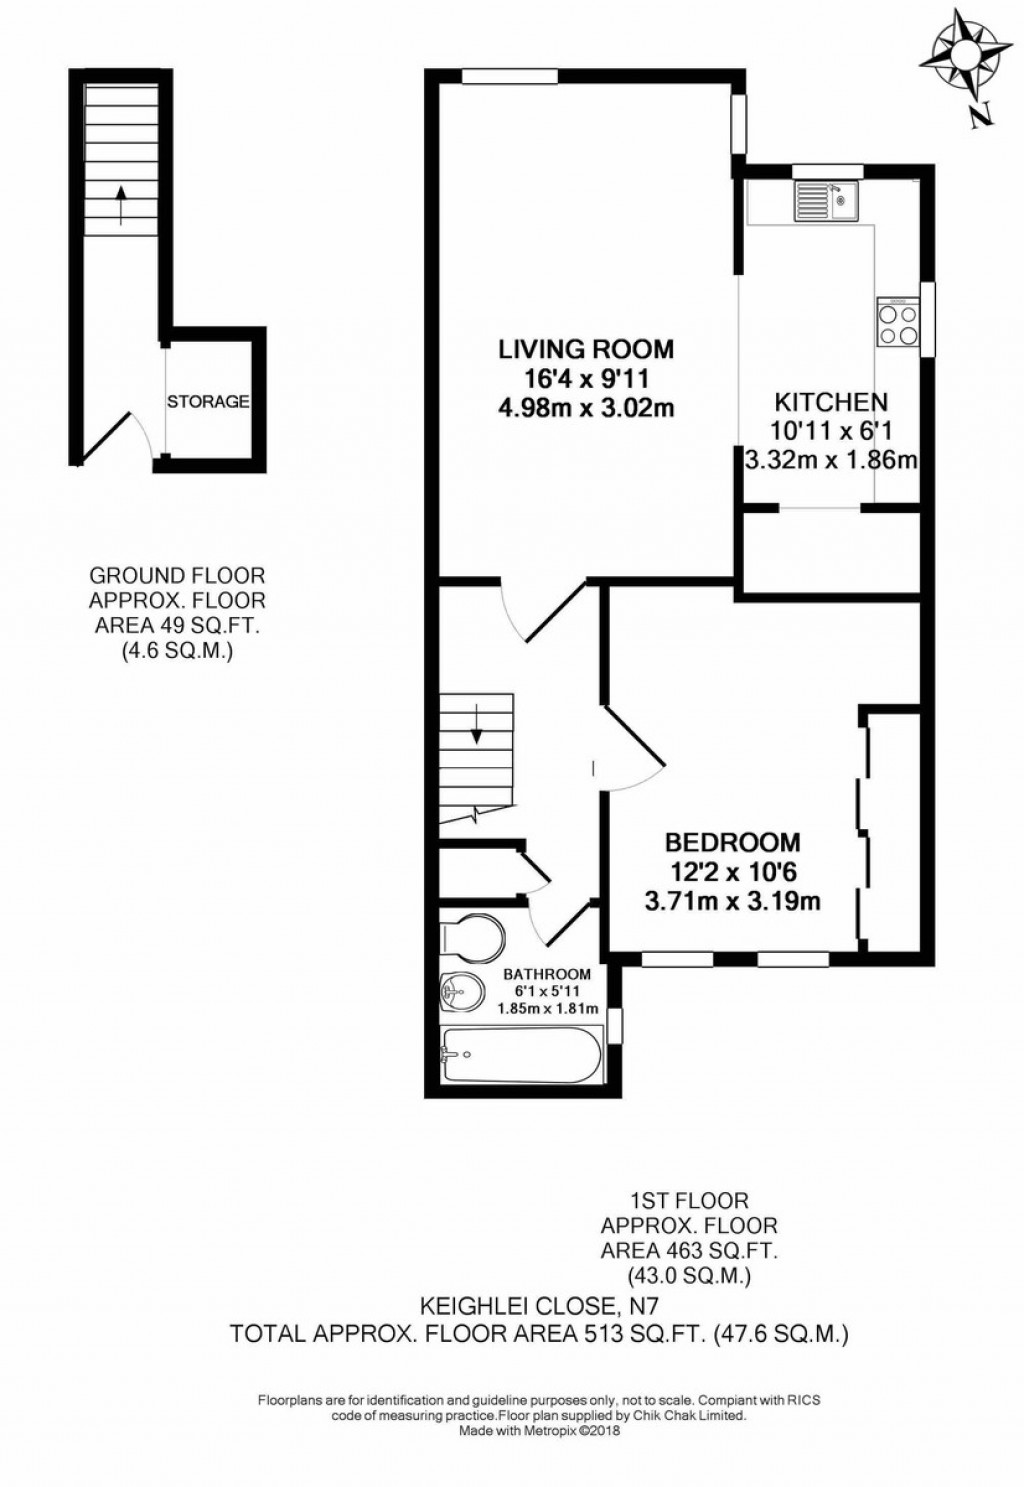 Floorplans For Keighley Close, London